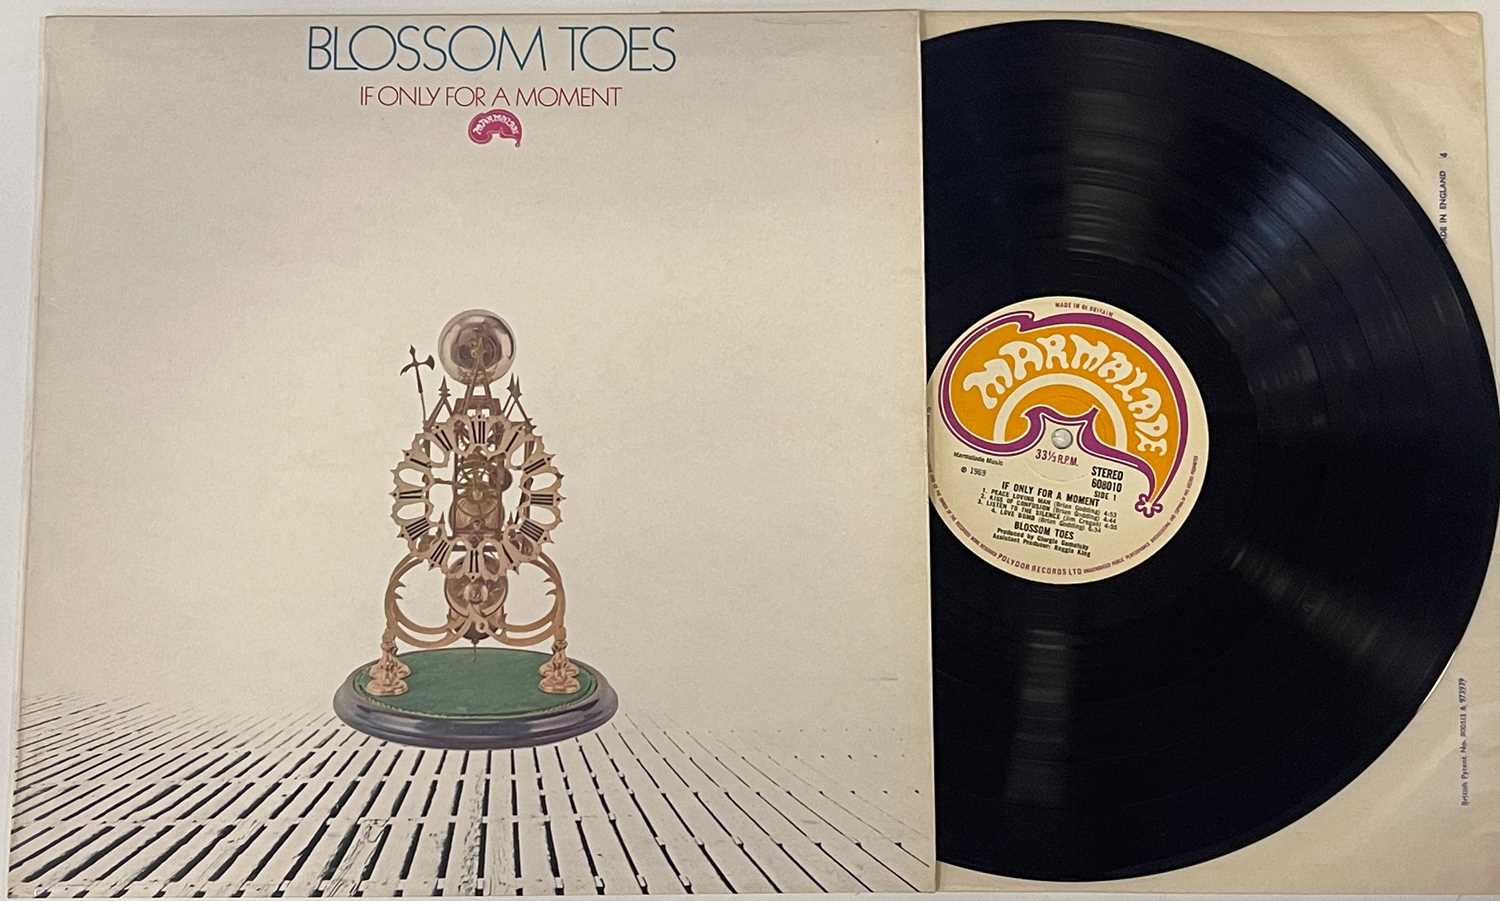 BLOSSOM TOES - IF ONLY FOR A MOMENT LP (ORIGINAL UK COPY - MARMALADE 608010)